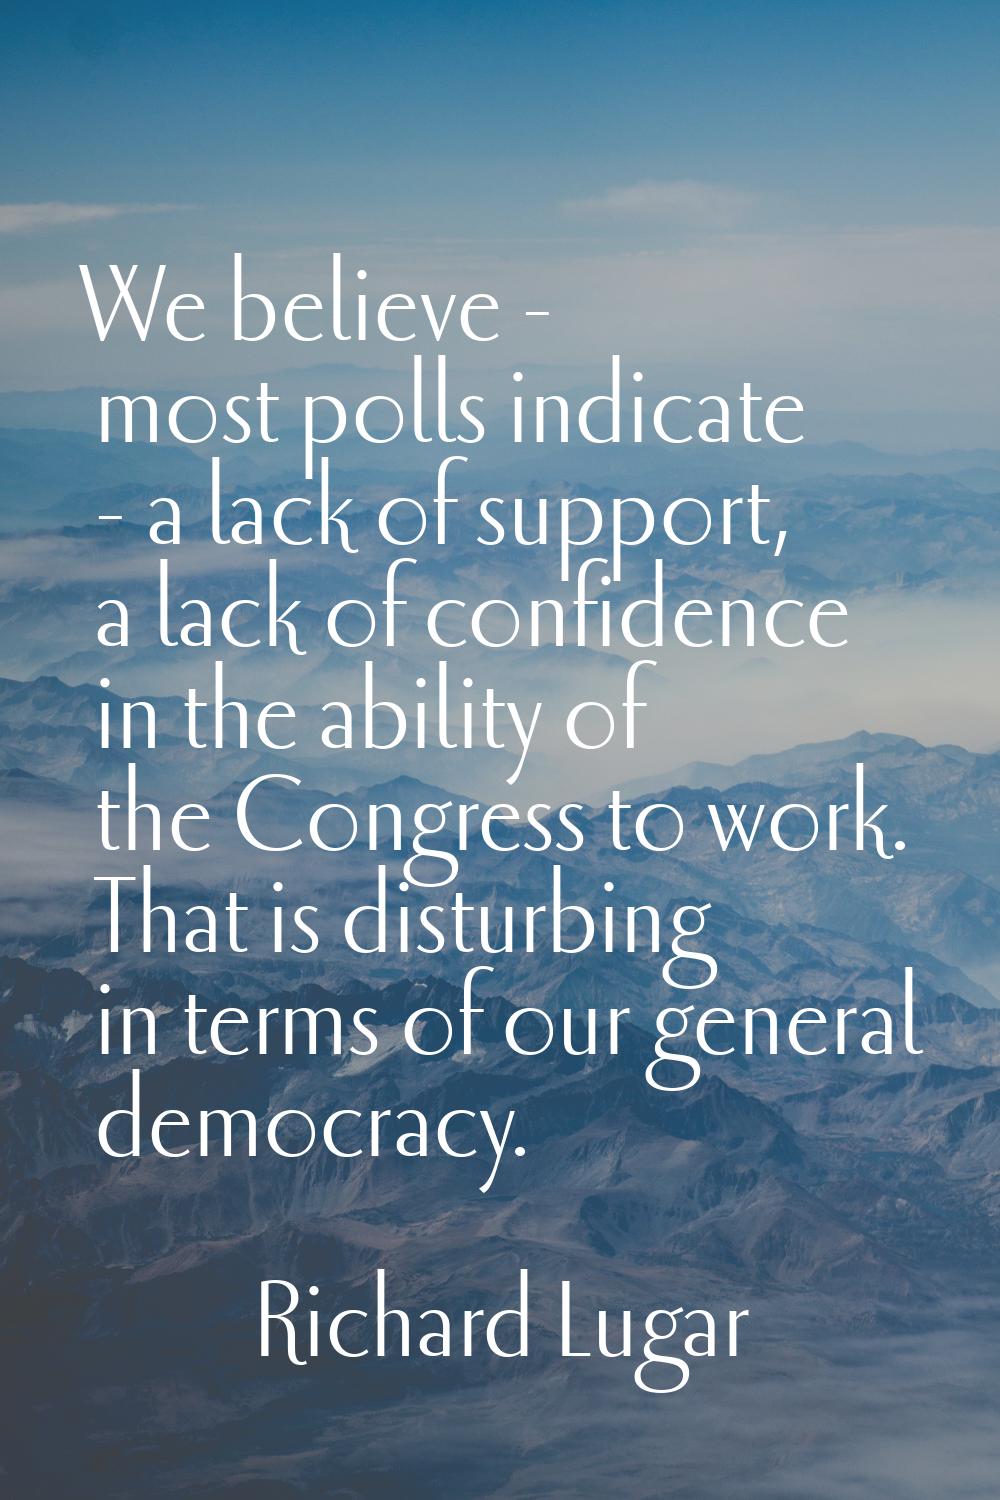 We believe - most polls indicate - a lack of support, a lack of confidence in the ability of the Co